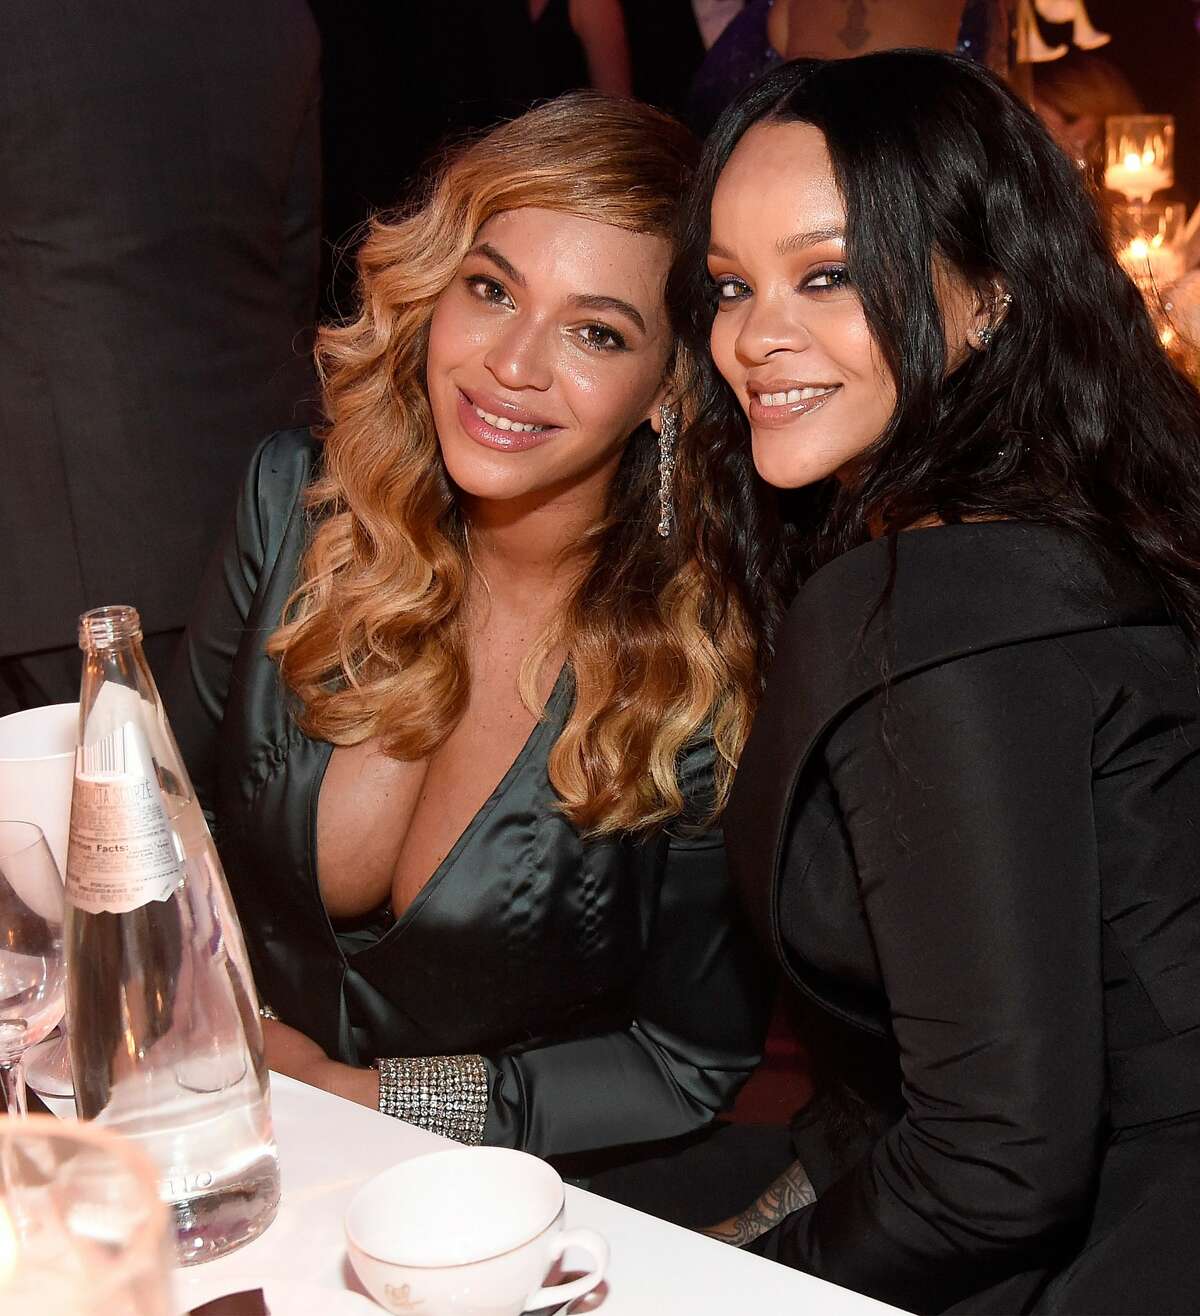 Beyonce and Rihanna attend Rihanna's 3rd Annual Diamond Ball Benefitting The Clara Lionel Foundation at Cipriani Wall Street on September 14, 2017 in New York City.